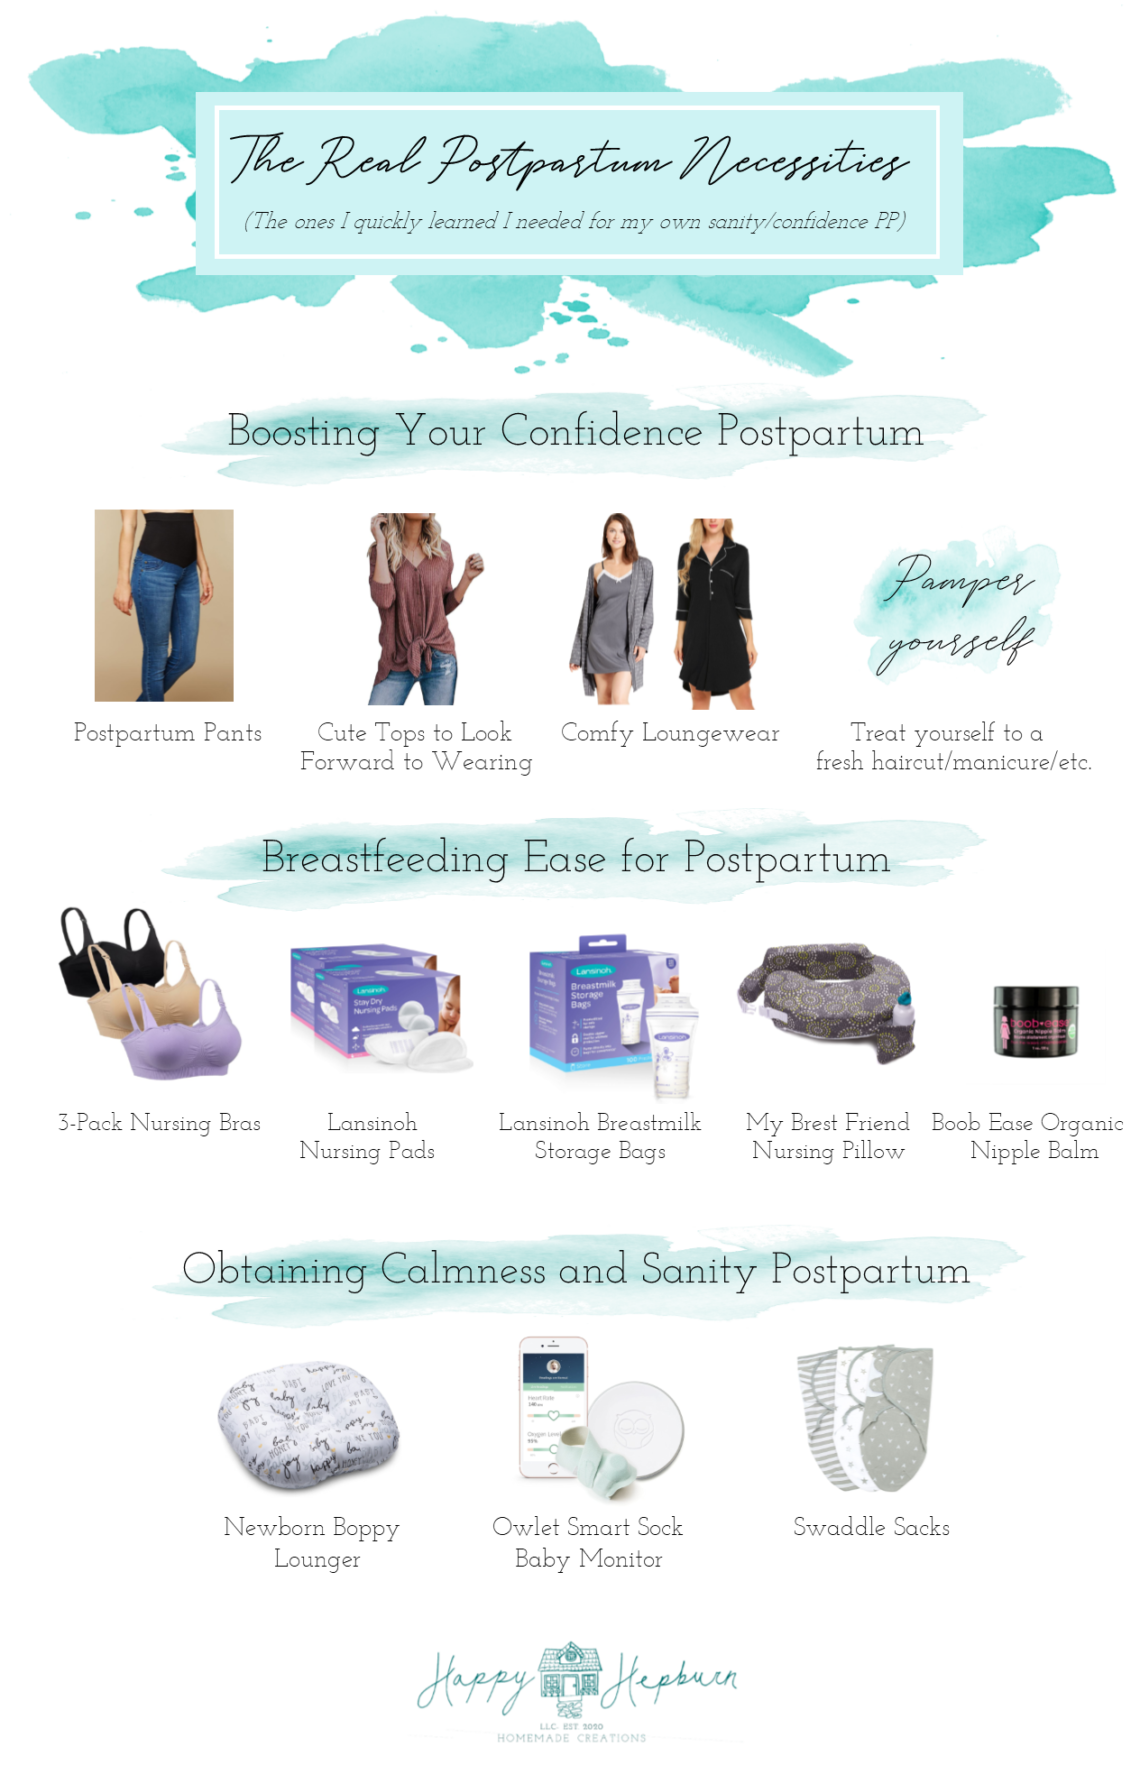 Postpartum Necessities the ones you need to boost our confidence and sanity during recovery featuring compression postpartum pants, nursing bras, robes and nightgowns, lansinoh breastfeeding essentials and more